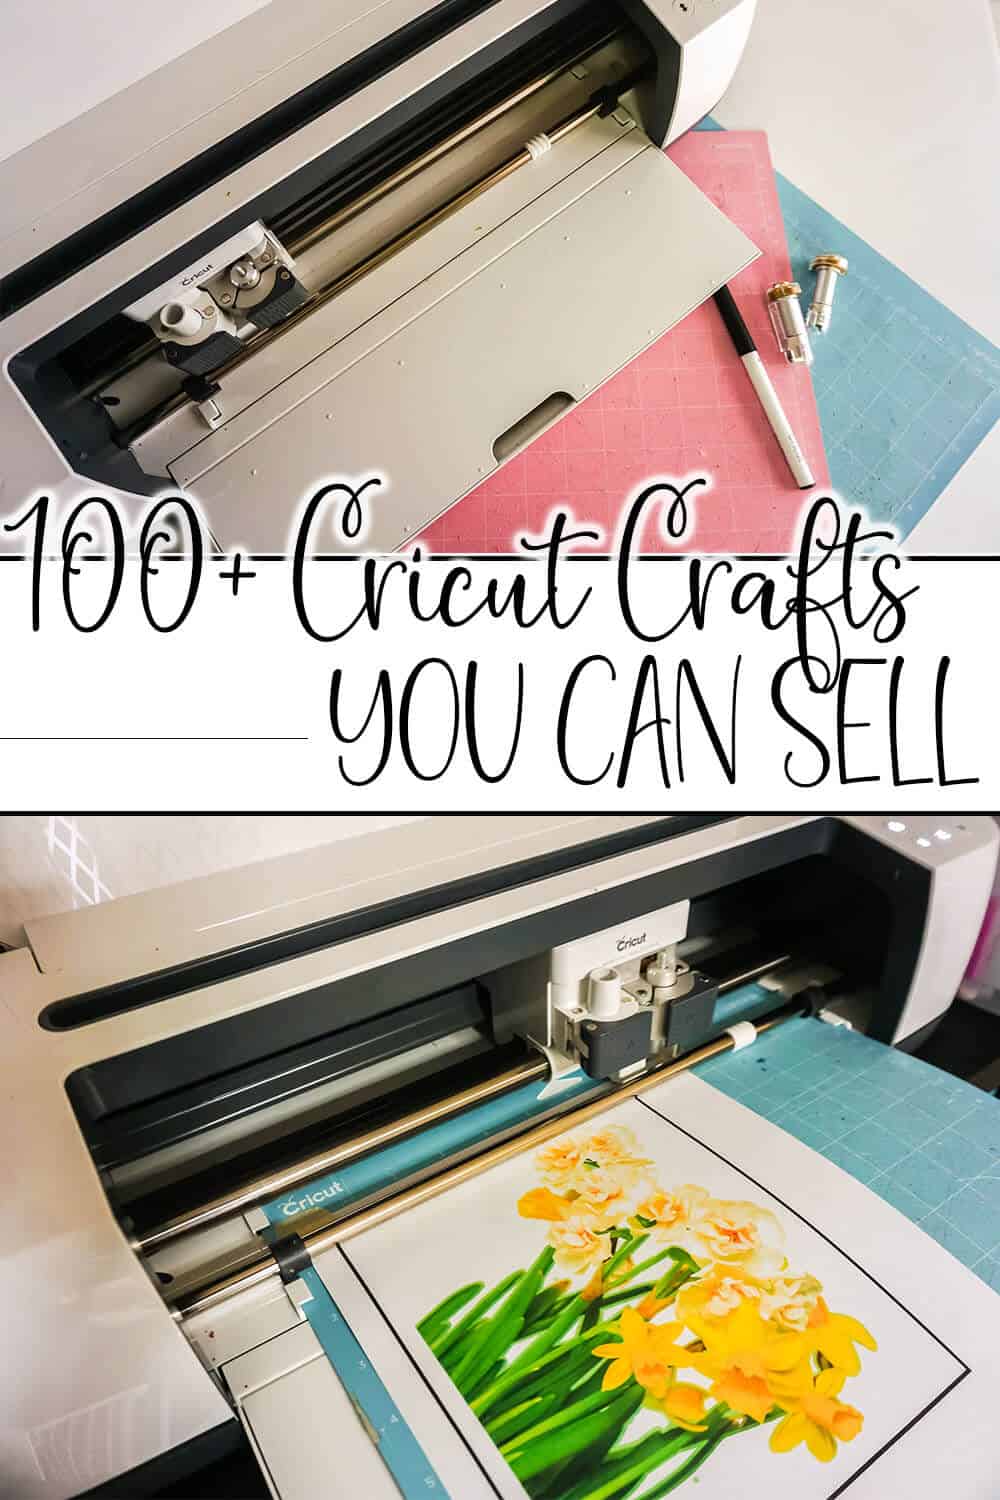 photo collage of cricut cutting craft items to sell on etsy with text which reads 100+ cricut crafts you can sell